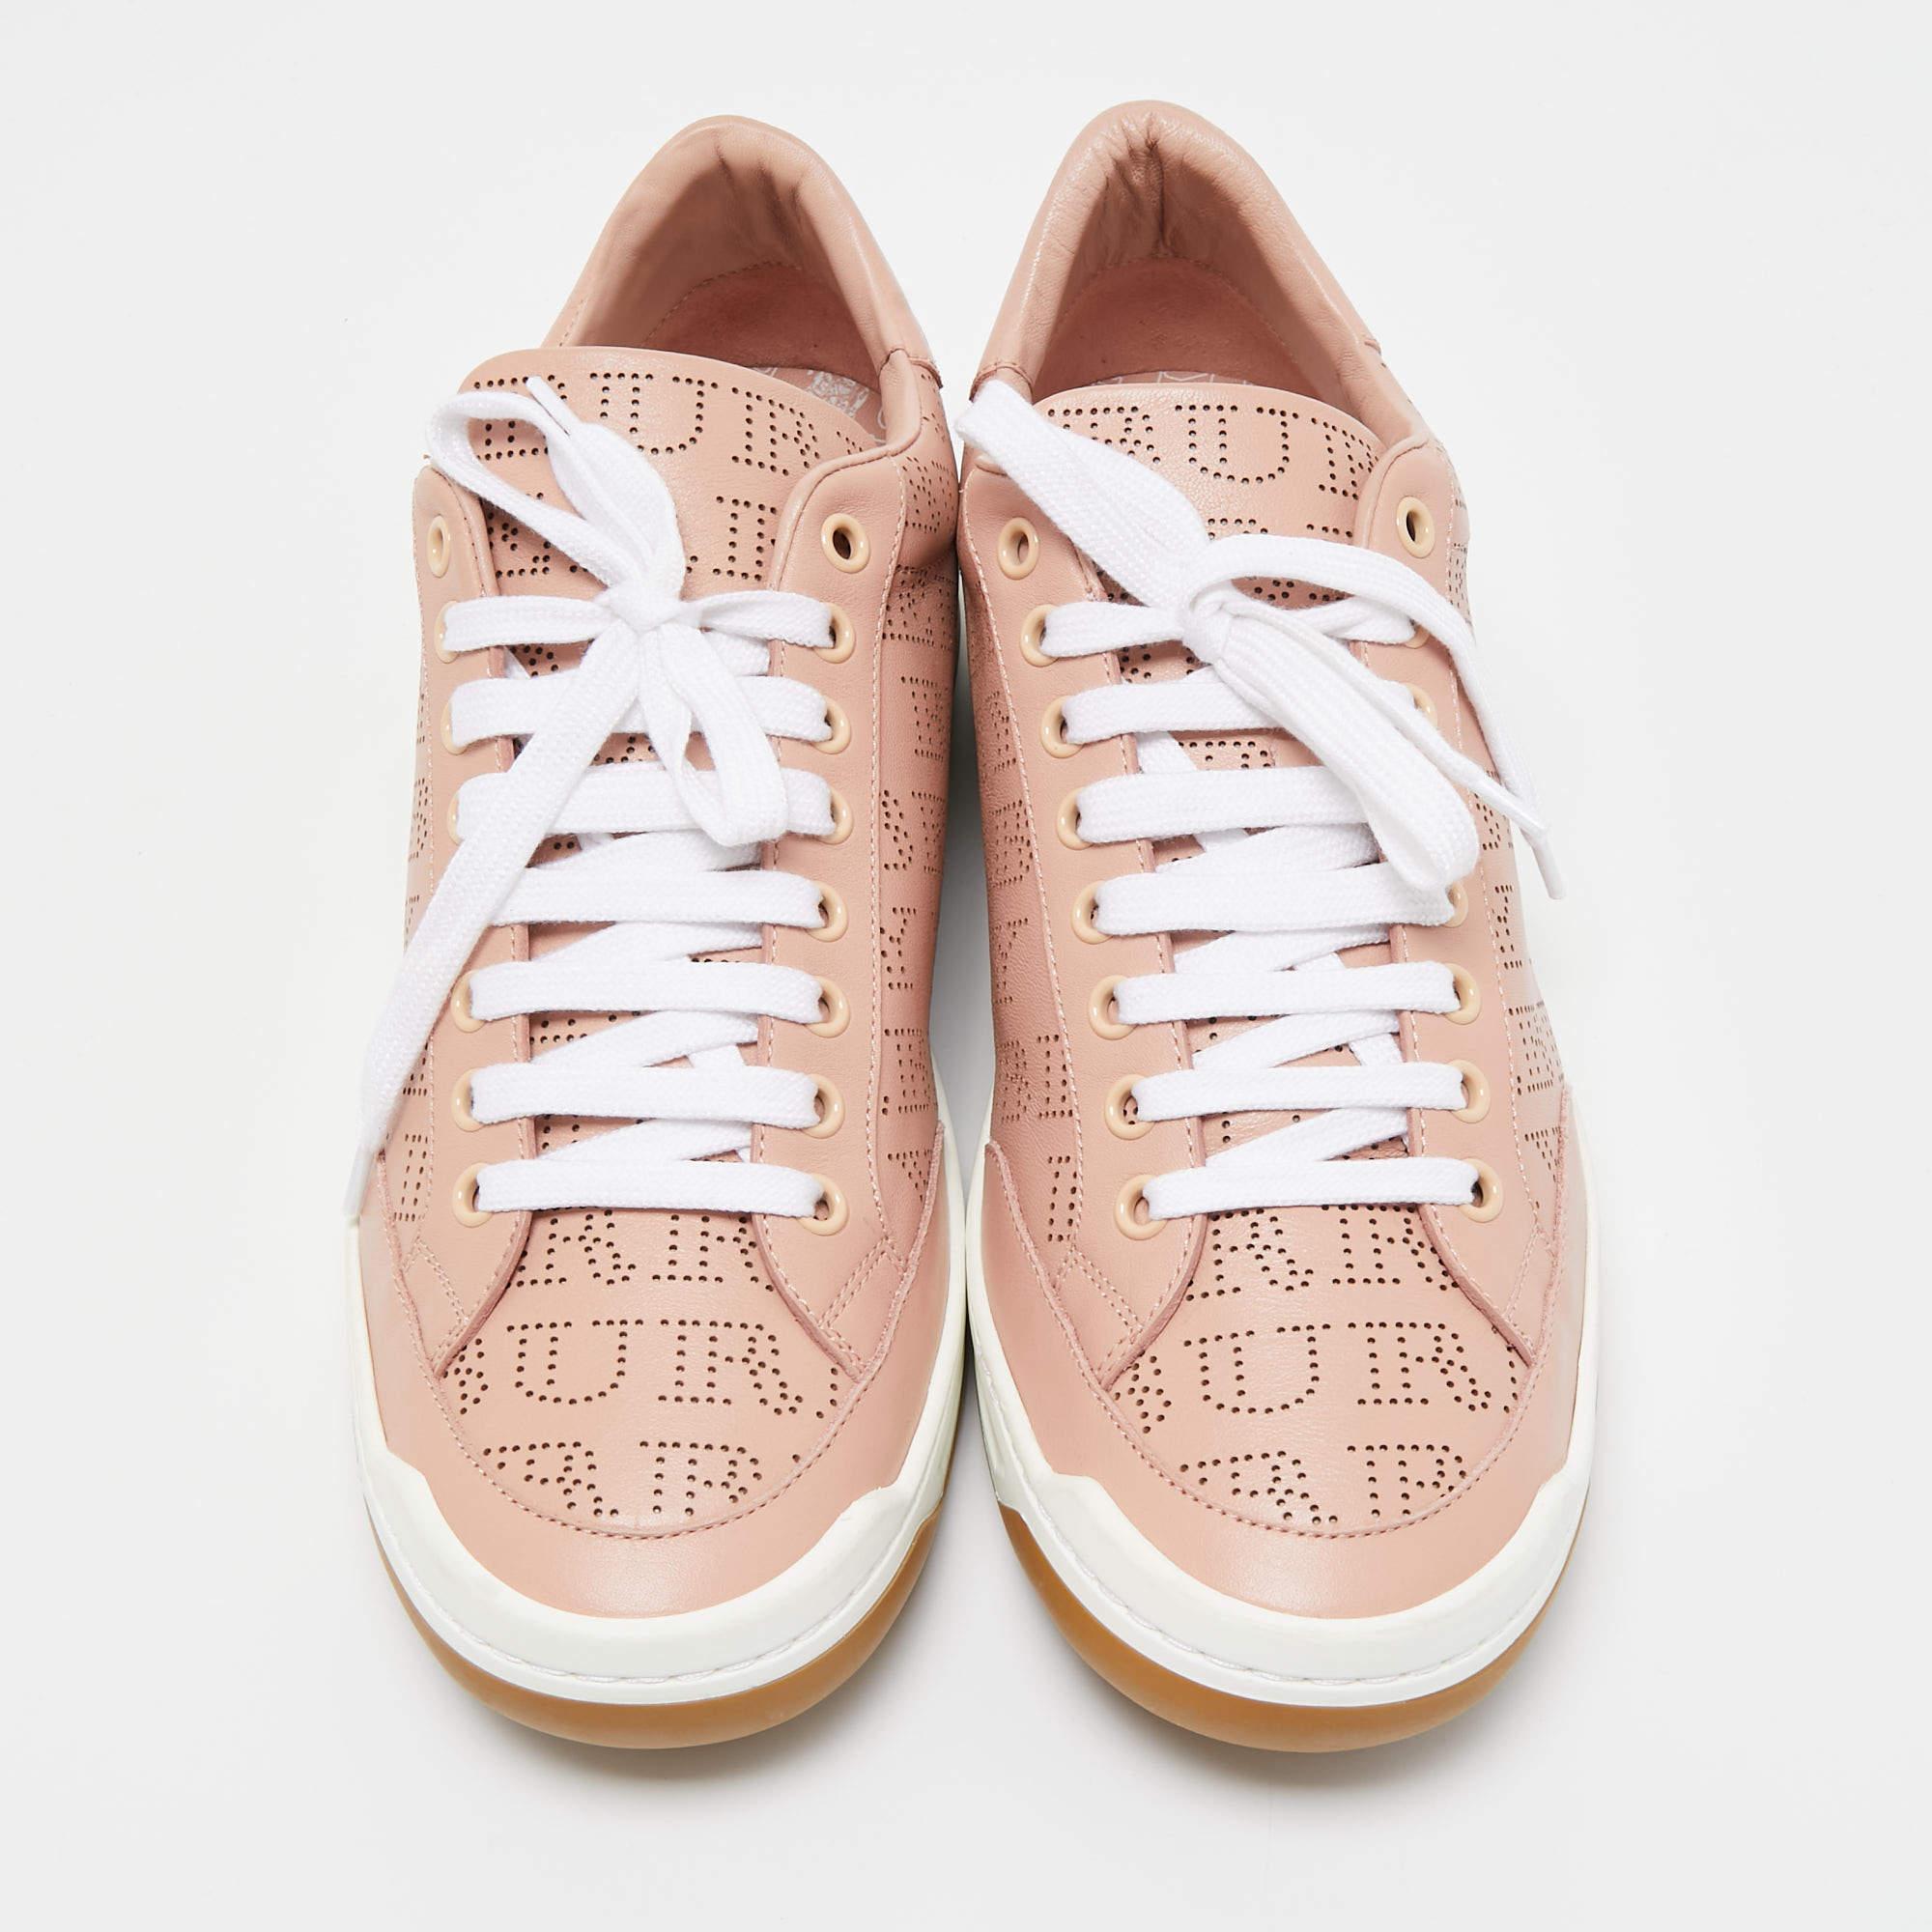 Burberry Pink Leather Westford Low Top Sneakers Size 41 In New Condition For Sale In Dubai, Al Qouz 2